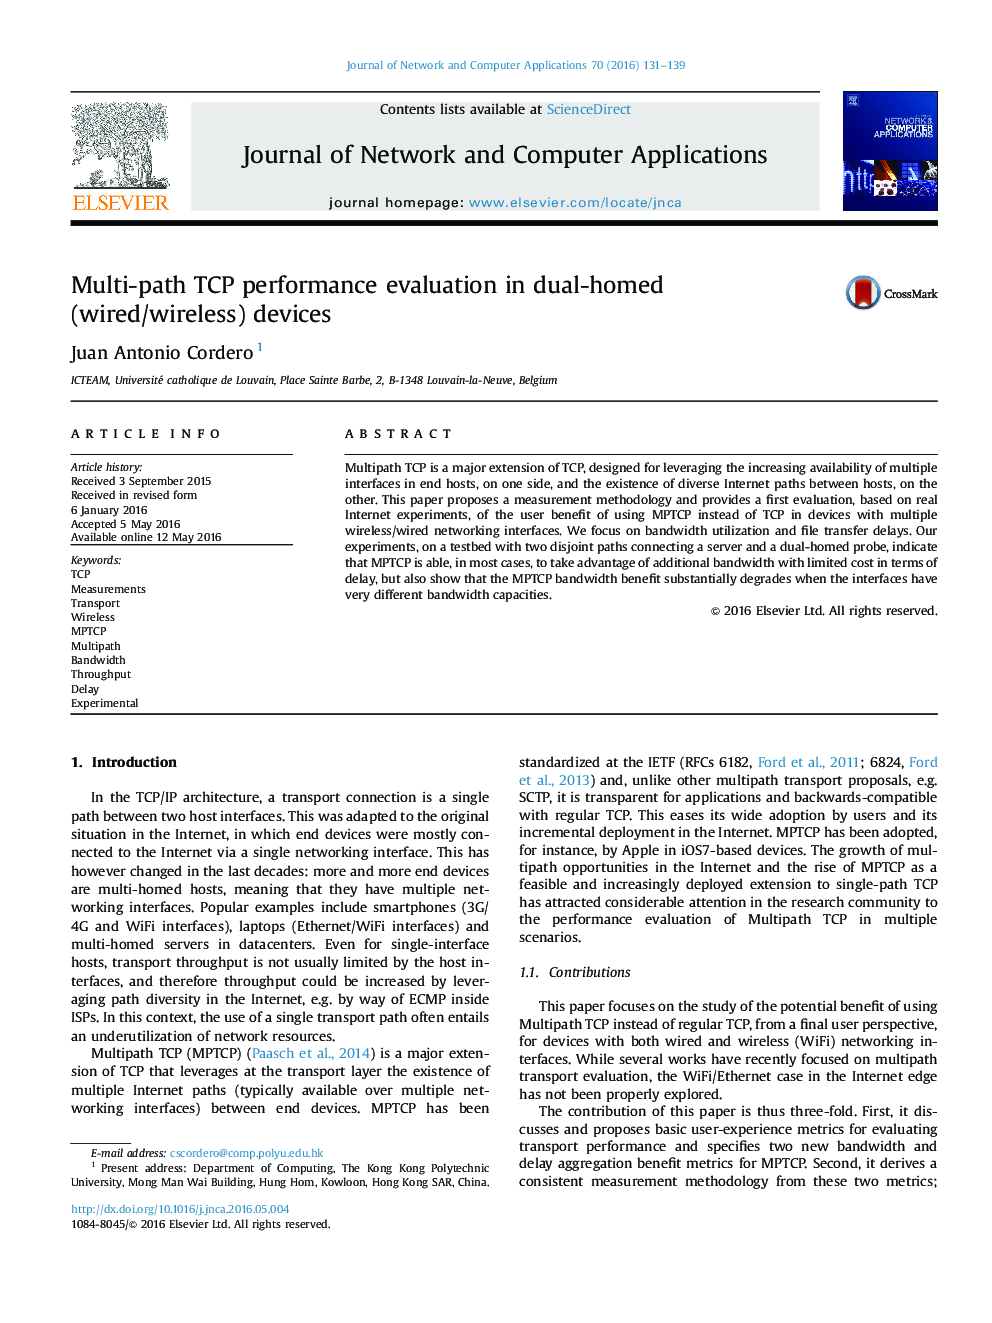 Multi-path TCP performance evaluation in dual-homed (wired/wireless) devices